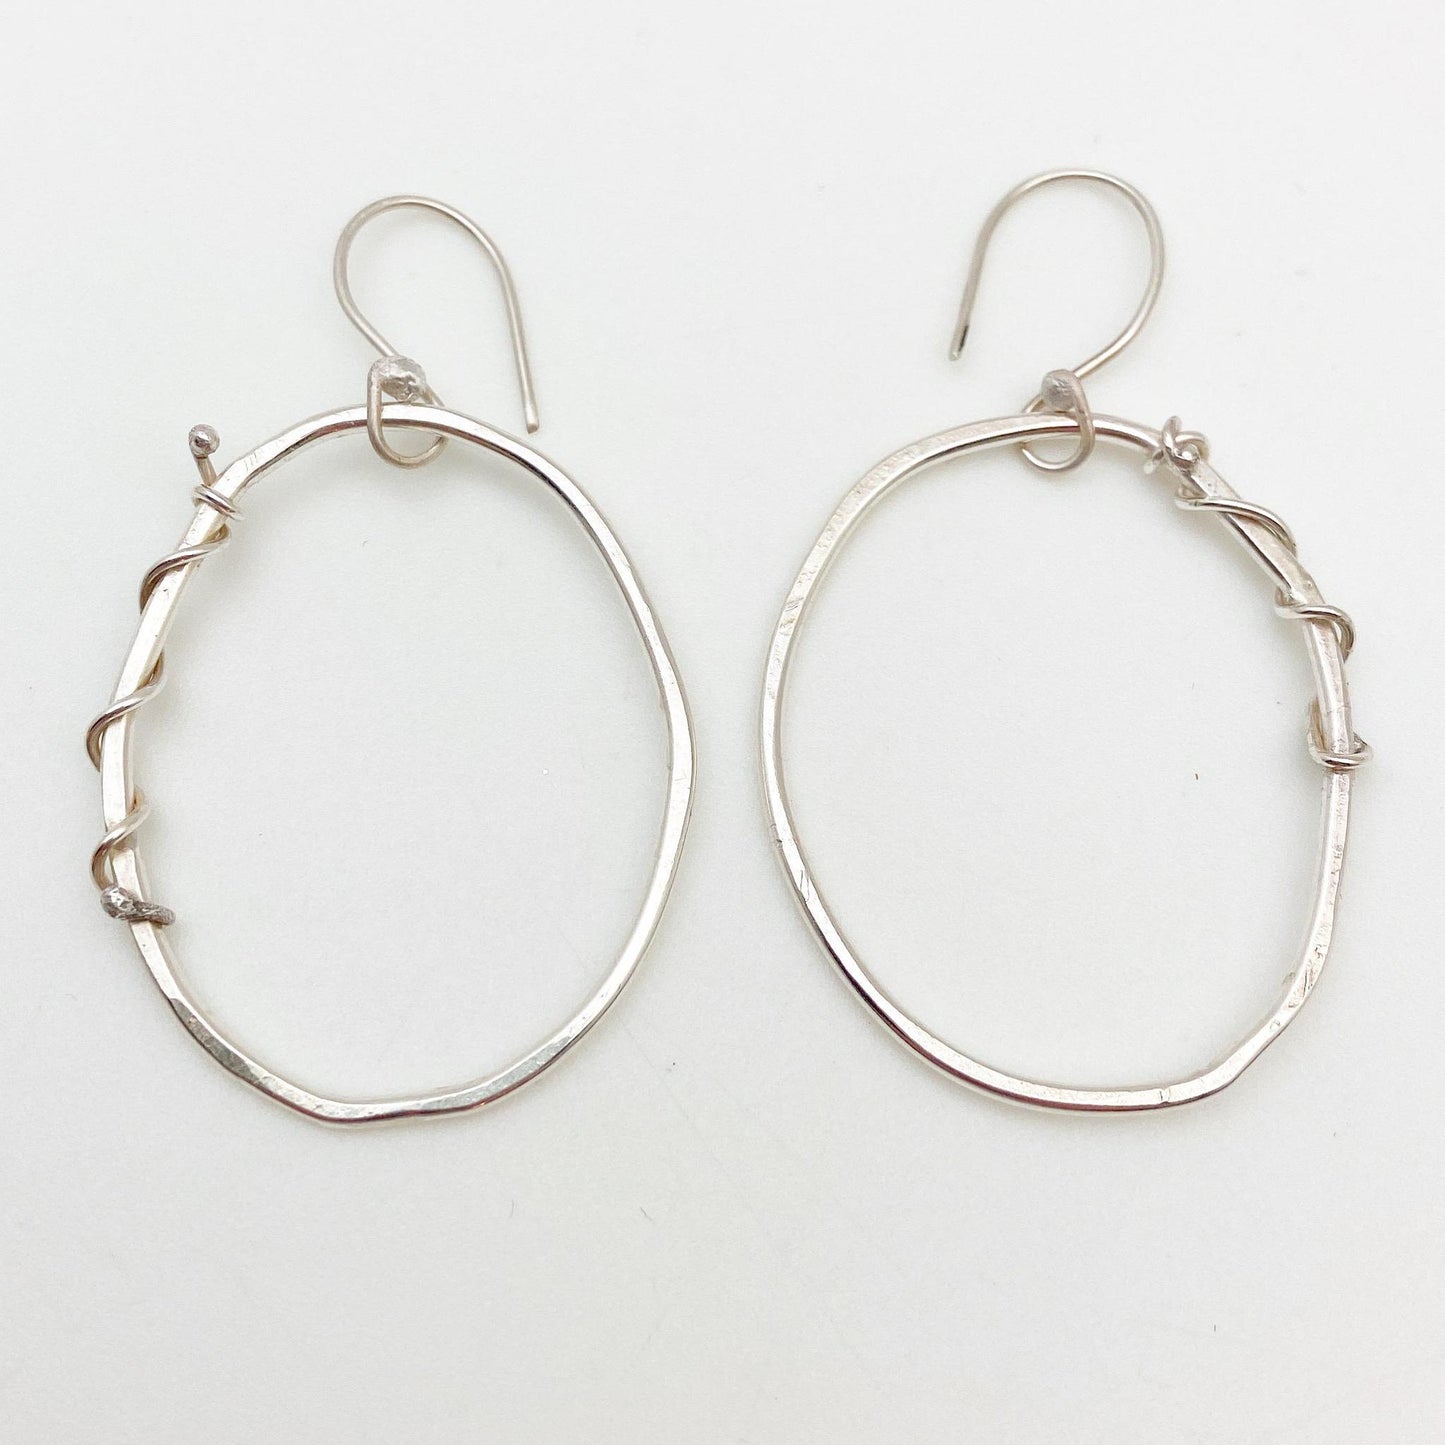 Earrings - Hoops with Wrapped Wire Twirl - Sterling Originals